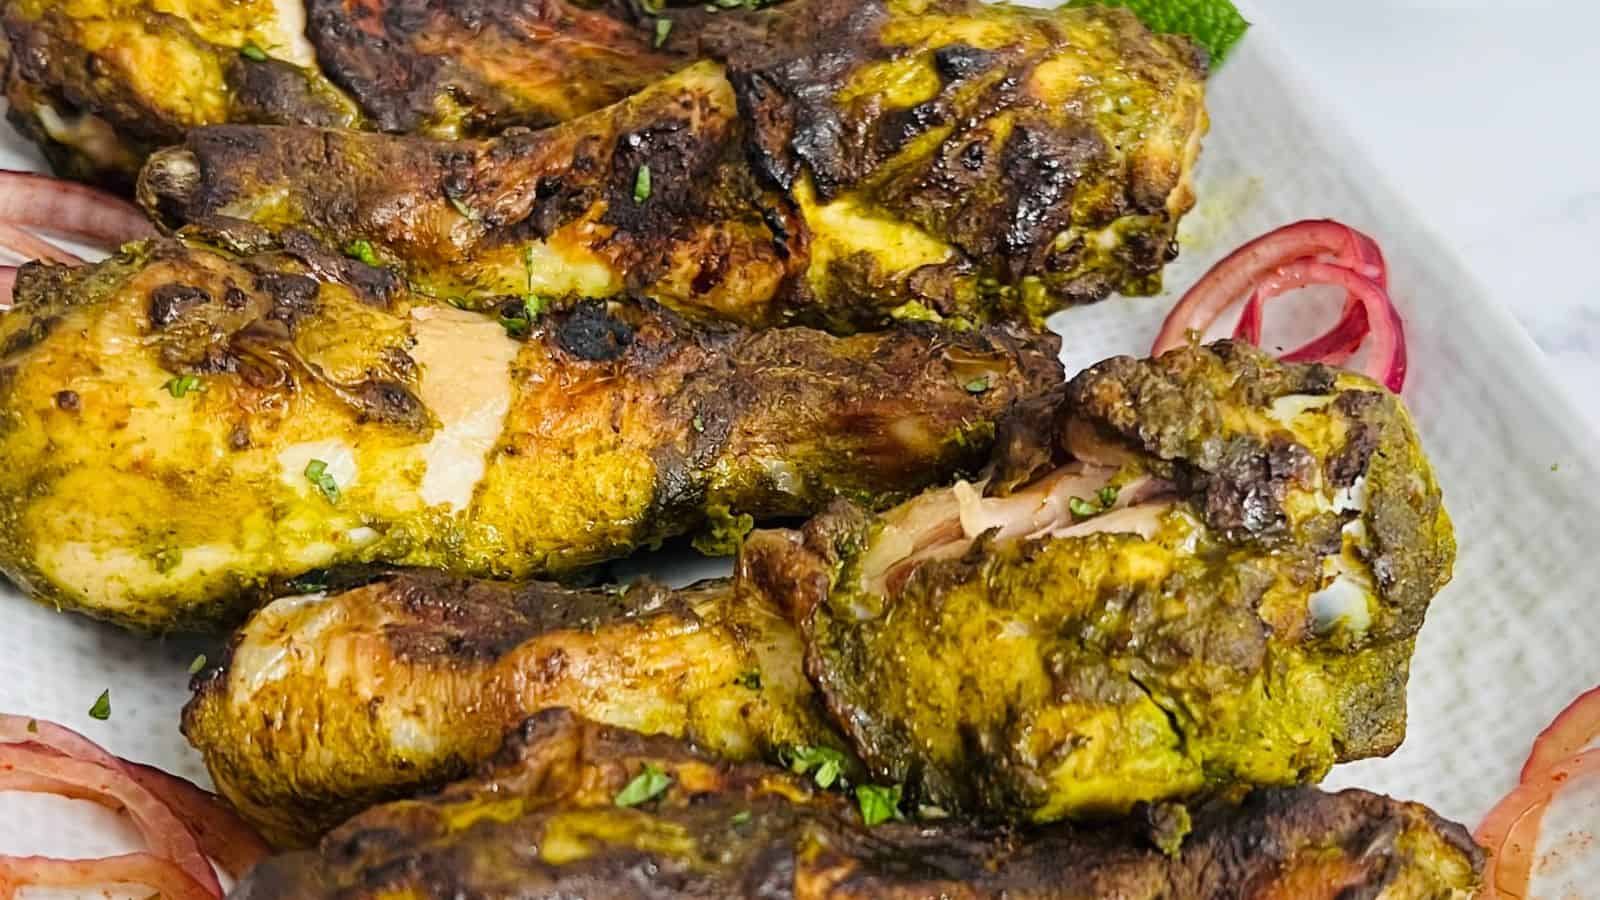 Close-up of several grilled chicken drumsticks coated with a yellowish-green seasoning, garnished with herbs and served on a white plate. Sliced red onions are placed alongside the chicken.